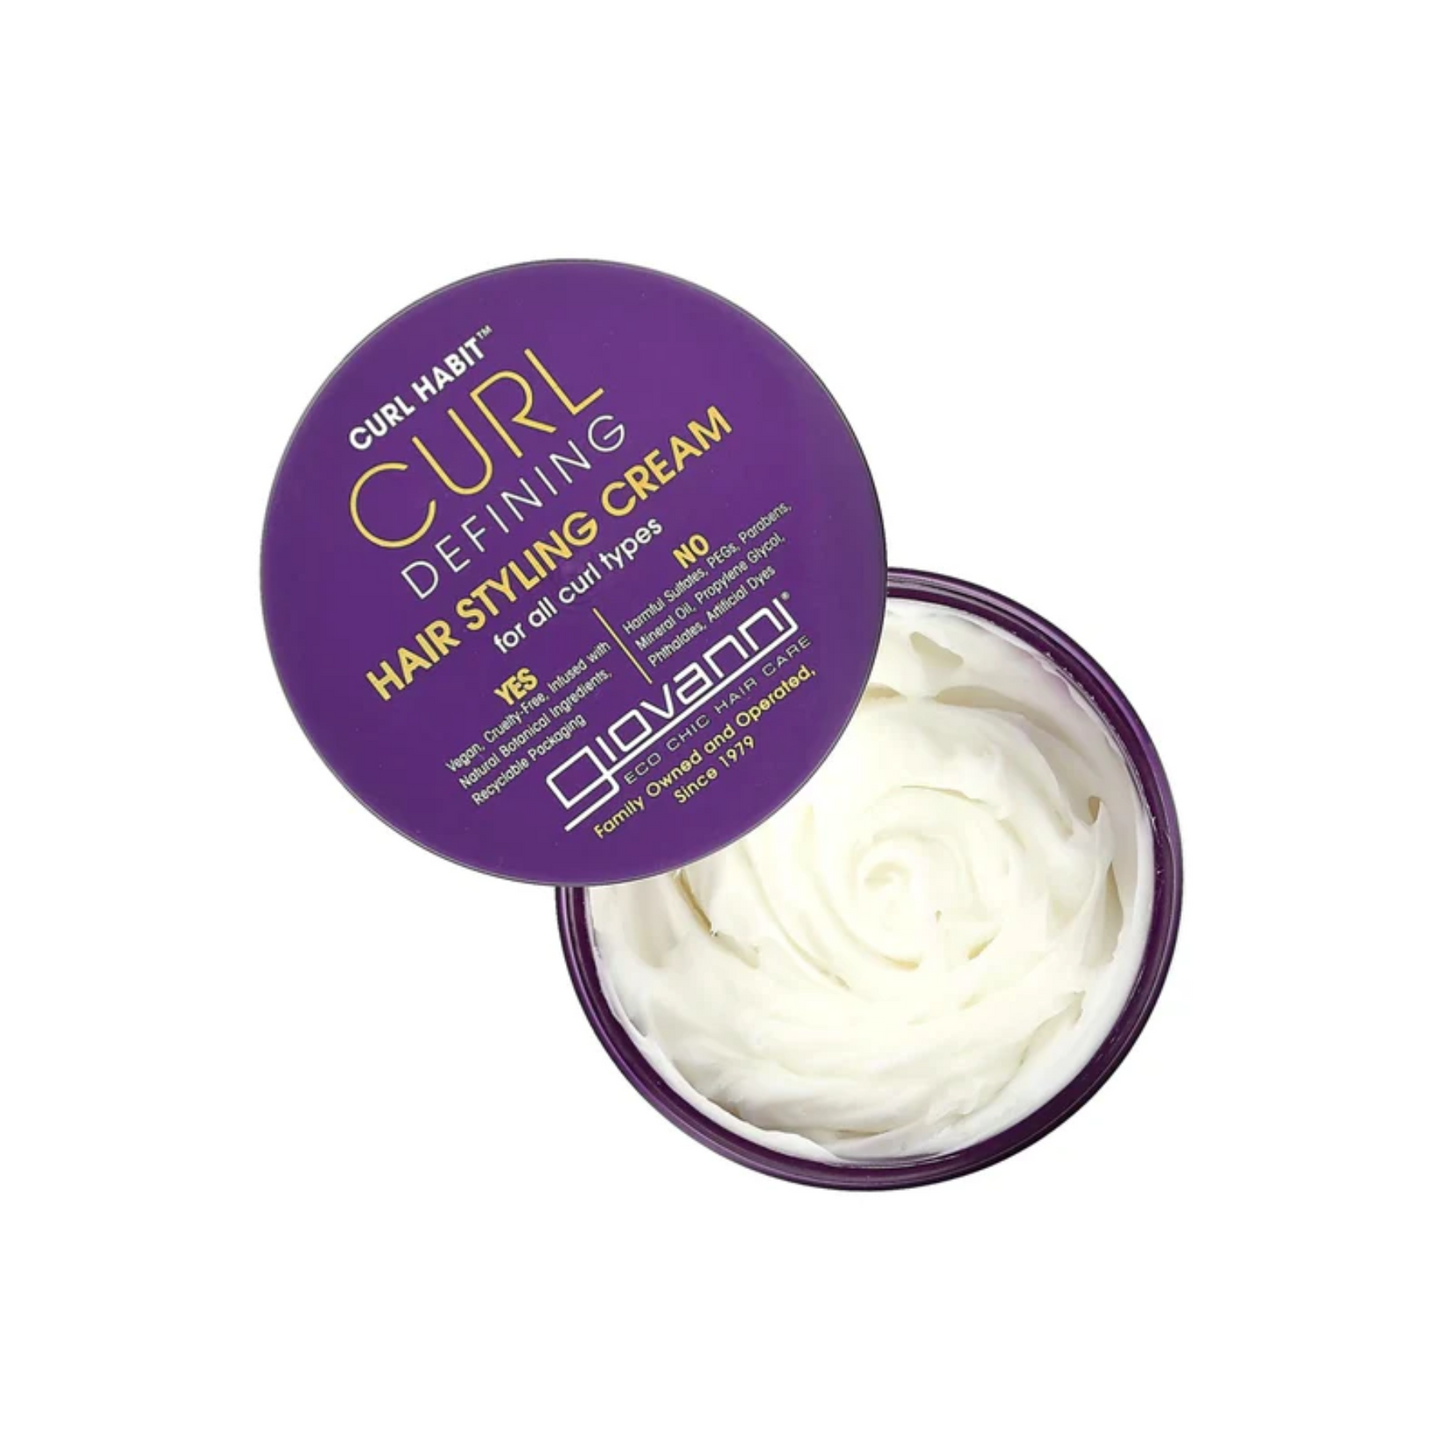 Giovanni Curl Habit Curl Defining Hair Styling Cream 295mL, Secures & Defines Curls, Coils and Waves